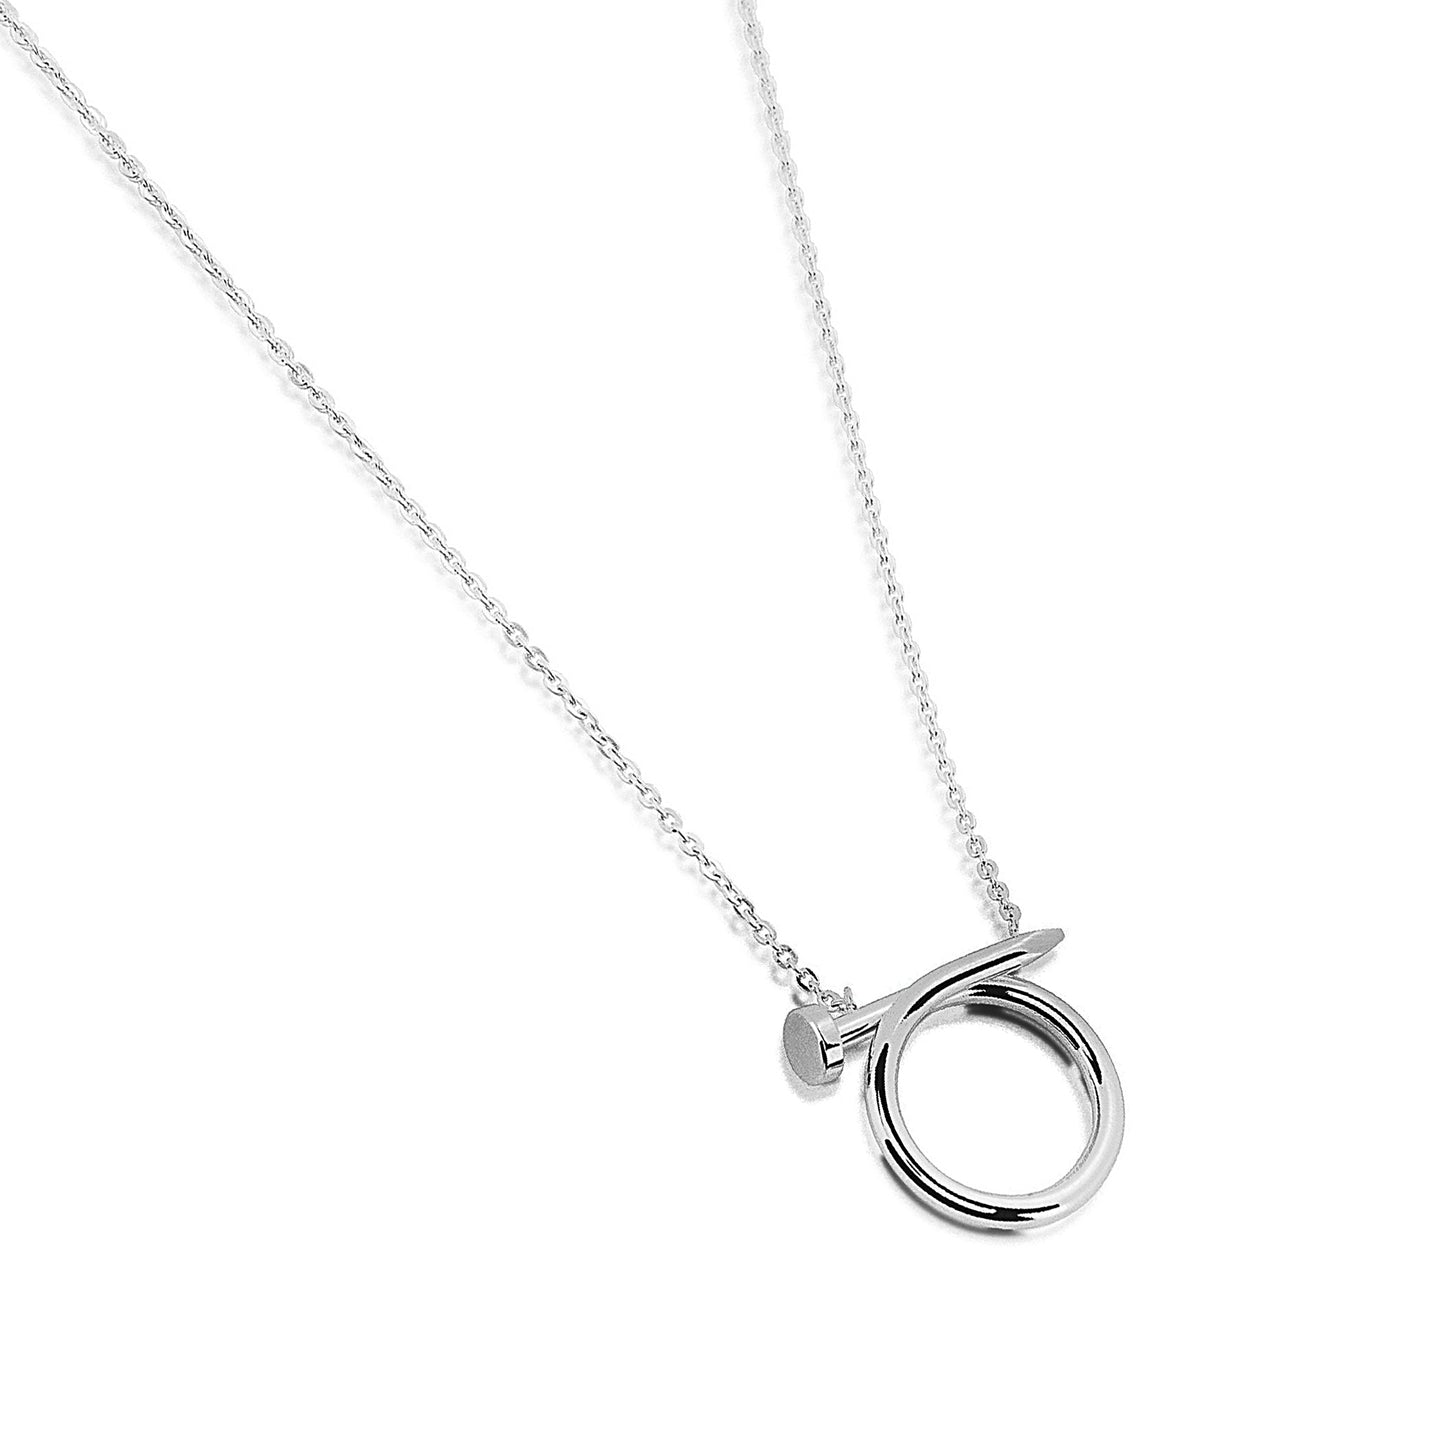 ELYA Women's High Polished Curved Nail Stainless Steel Pendant Necklace